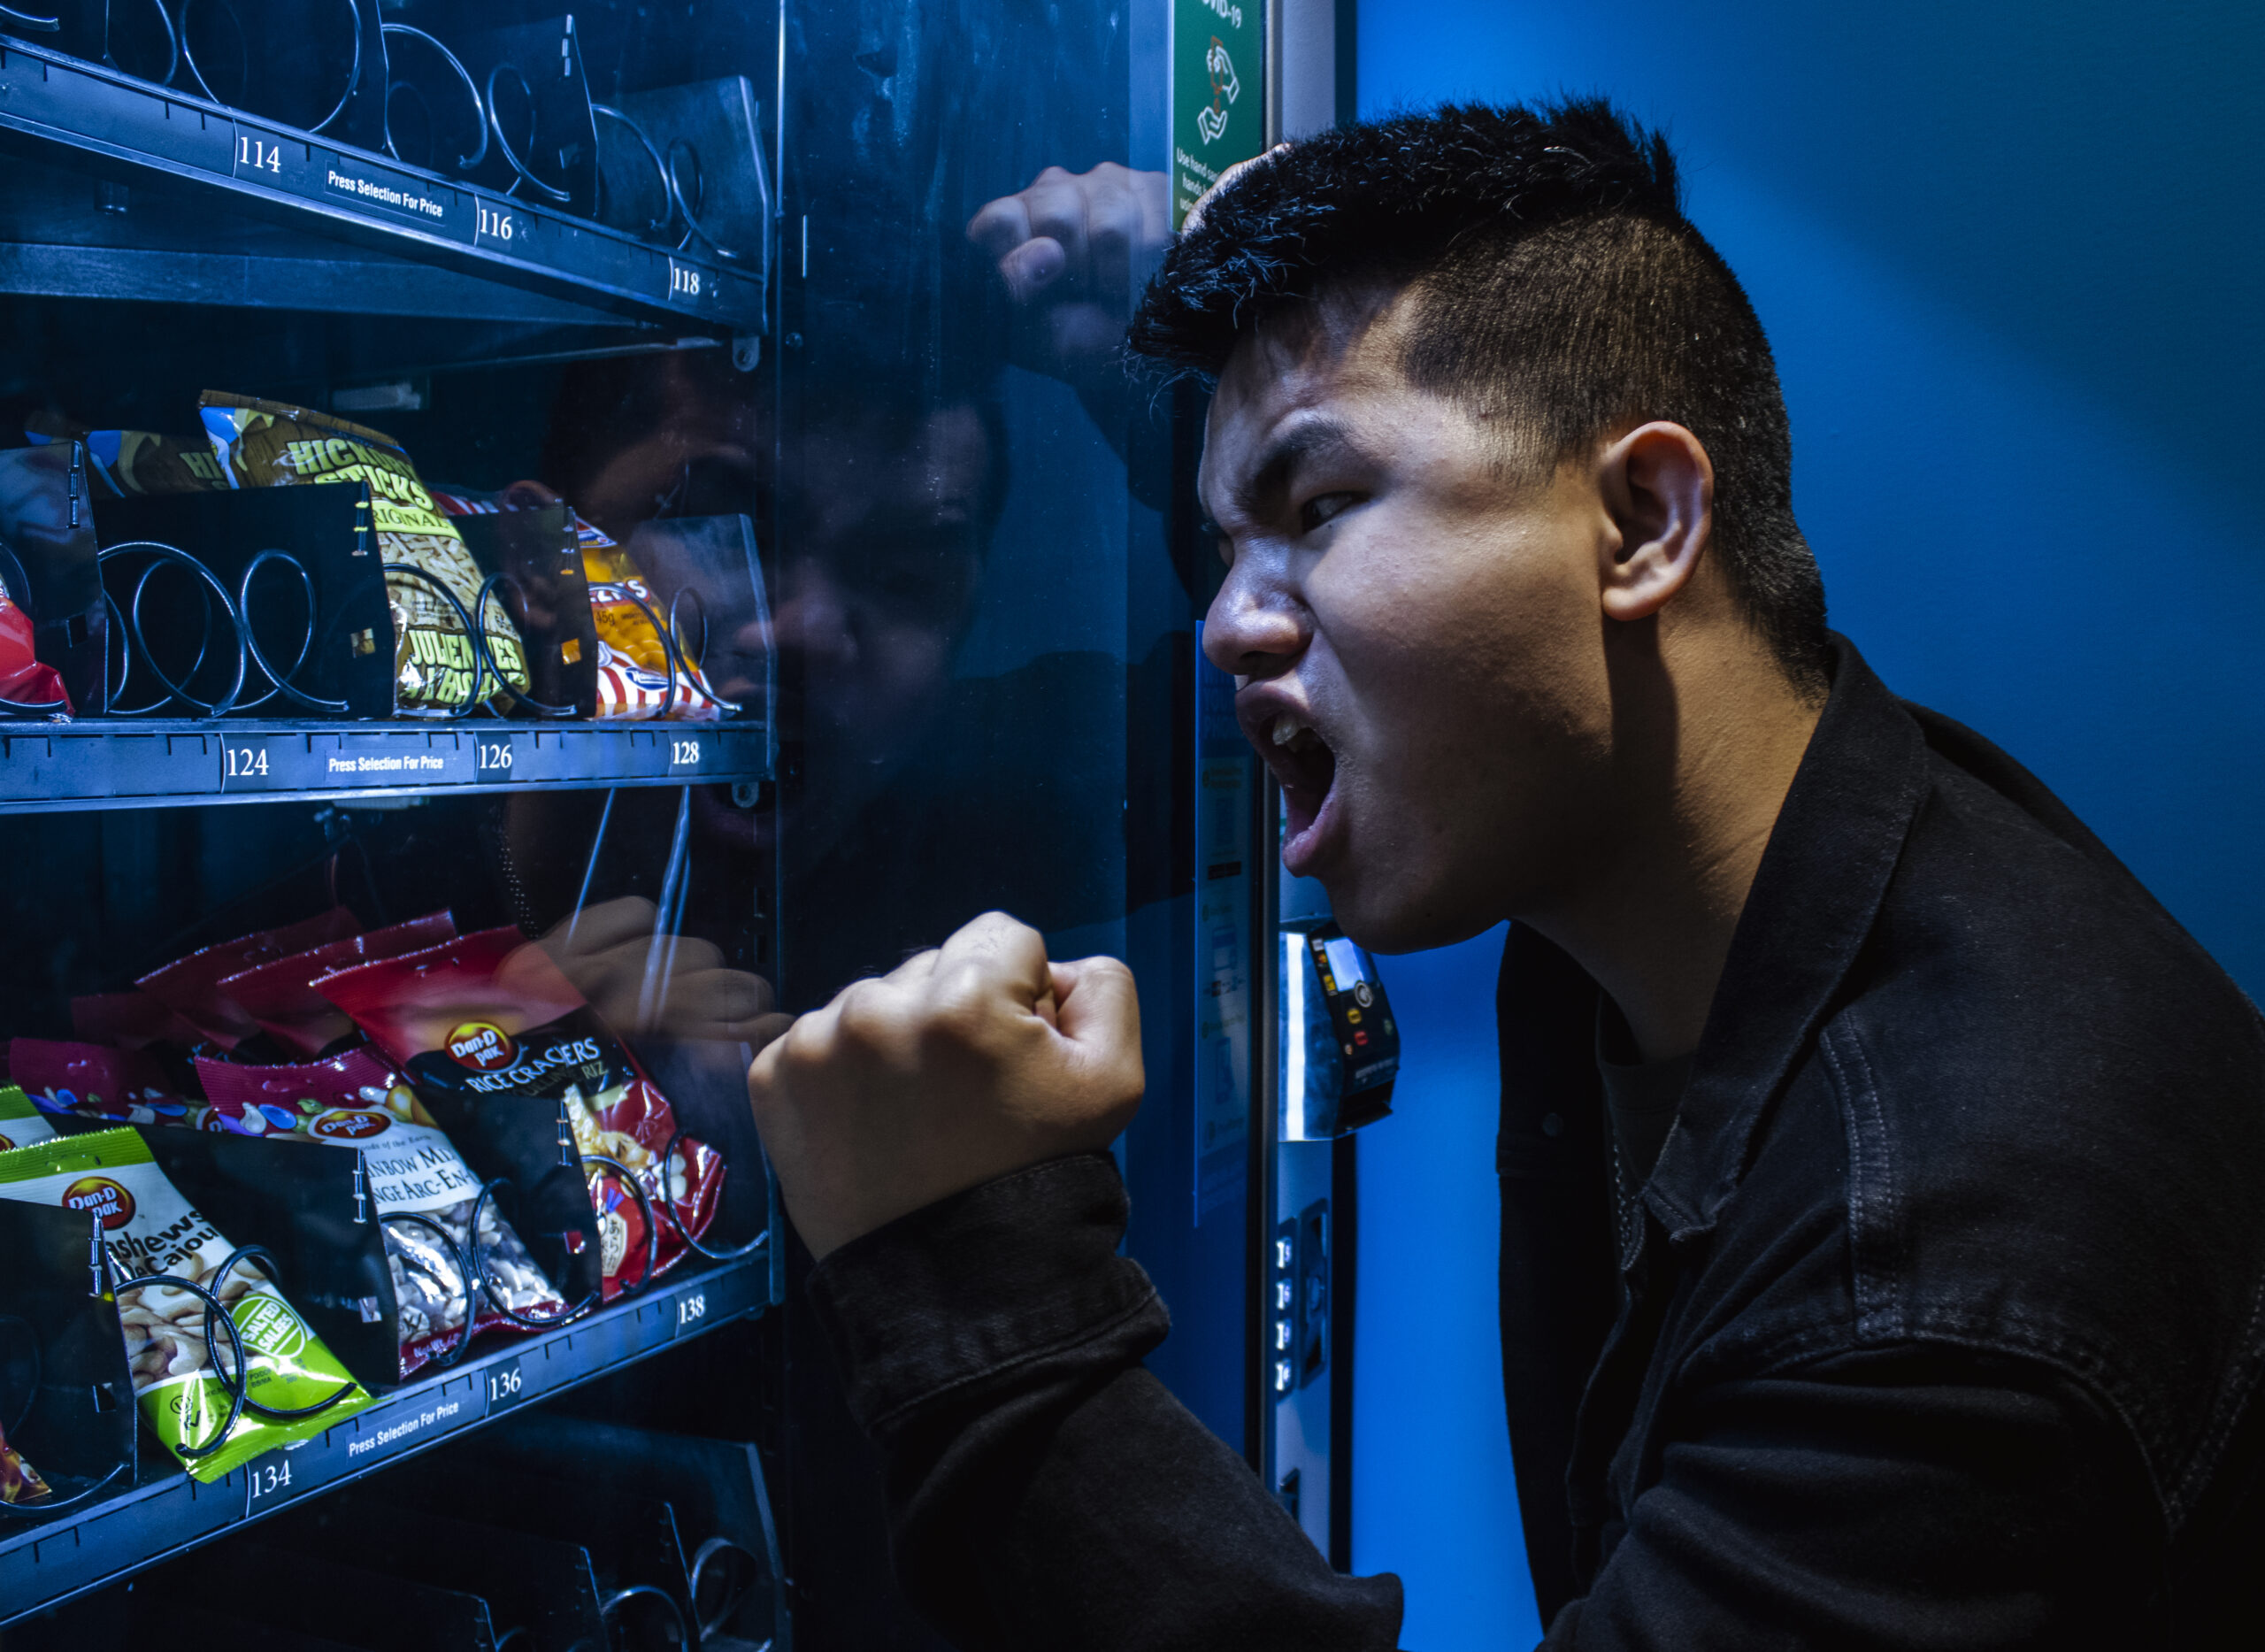 A man is yelling at a vending machine. The heel of his fist is against the glass, and he is leaning against the side of the machine. On his face is a look of pure outrage.